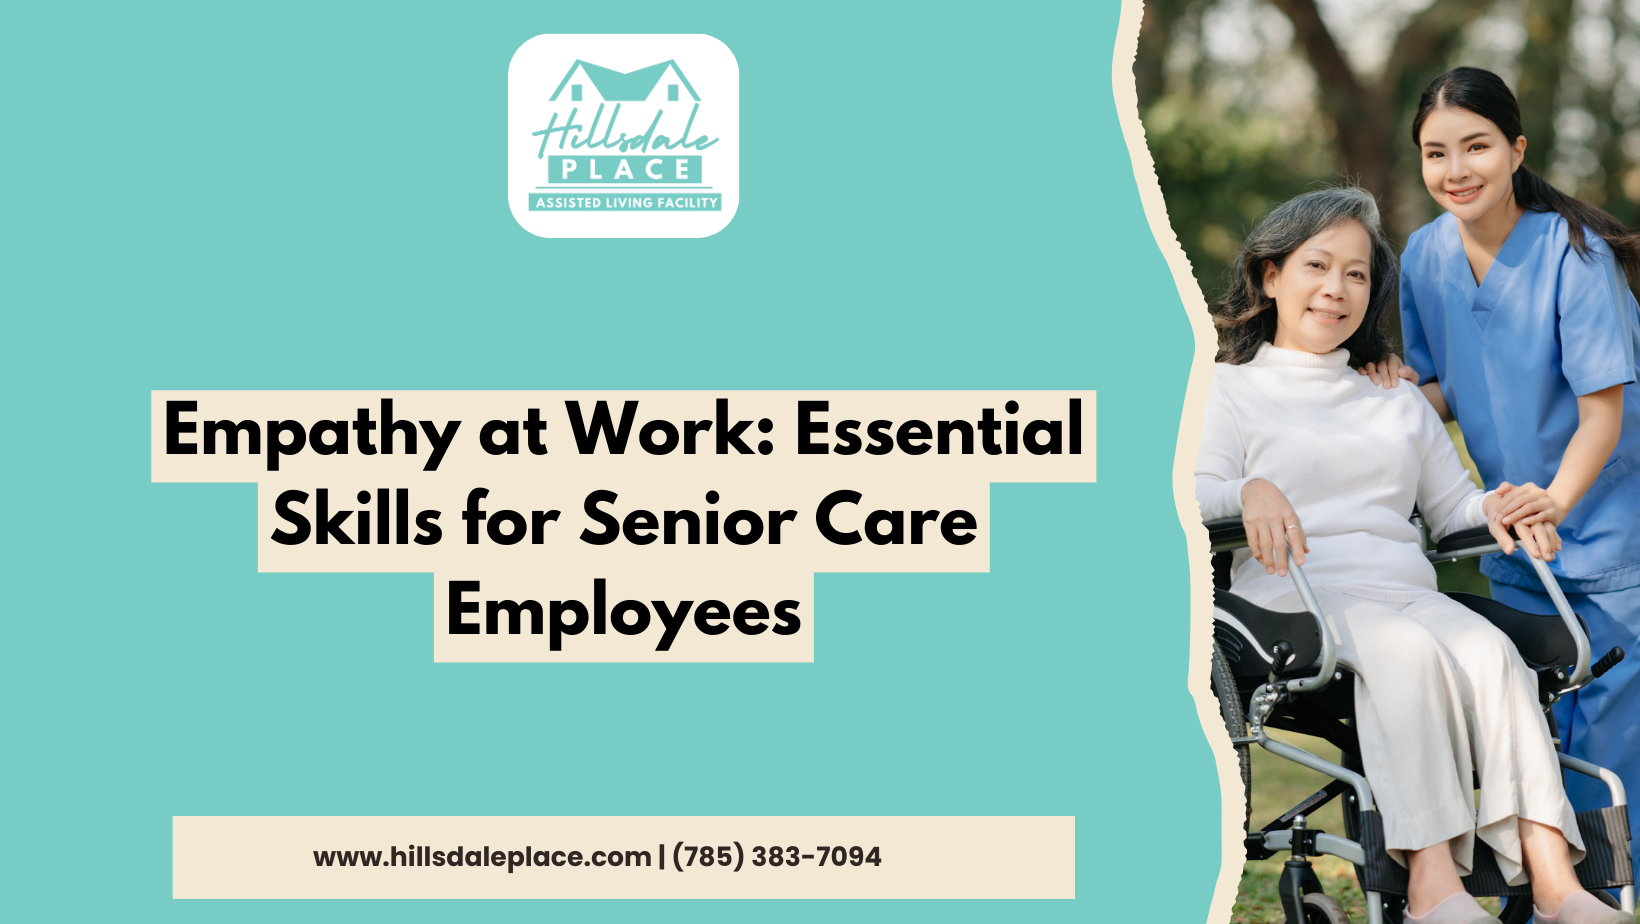 Empathy at Work: Essential Skills for Senior Care Employees